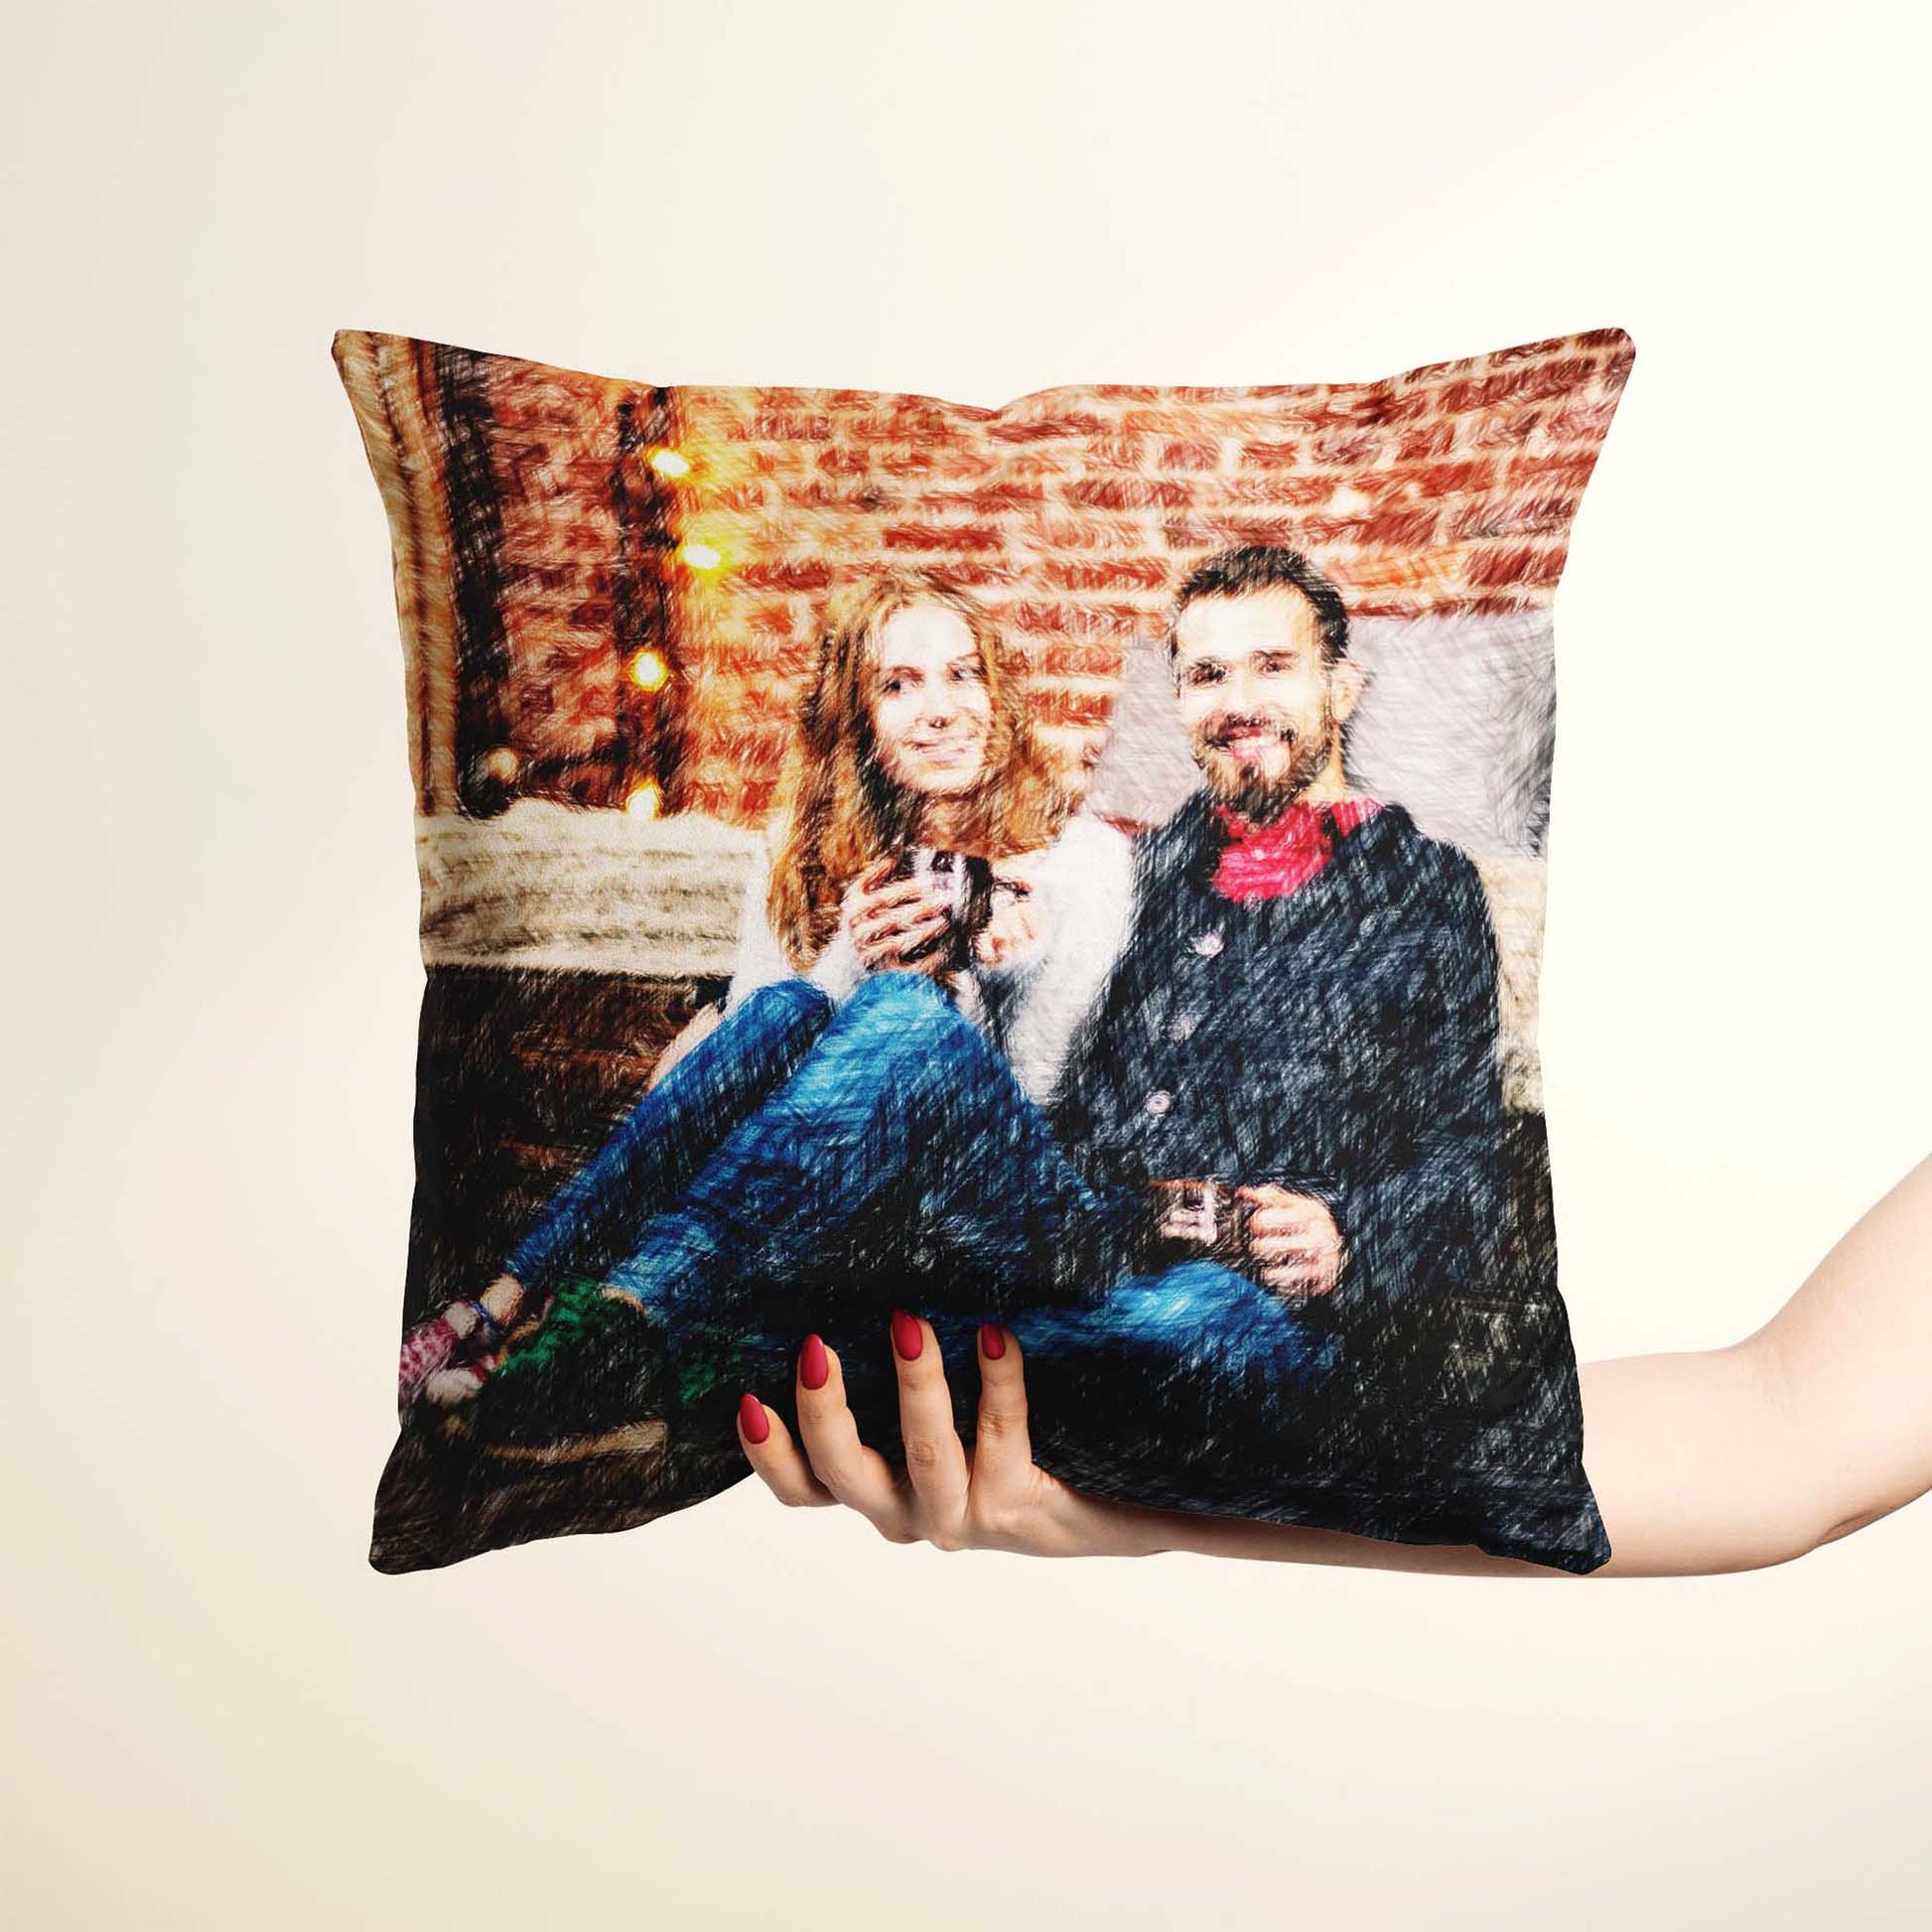 Add a burst of color and creativity to your home with our Personalised Colourful Drawing Cushion. Crafted from soft velvet and featuring a drawing from your photo, this cushion offers a unique and fun way to chill, relax, and unwind